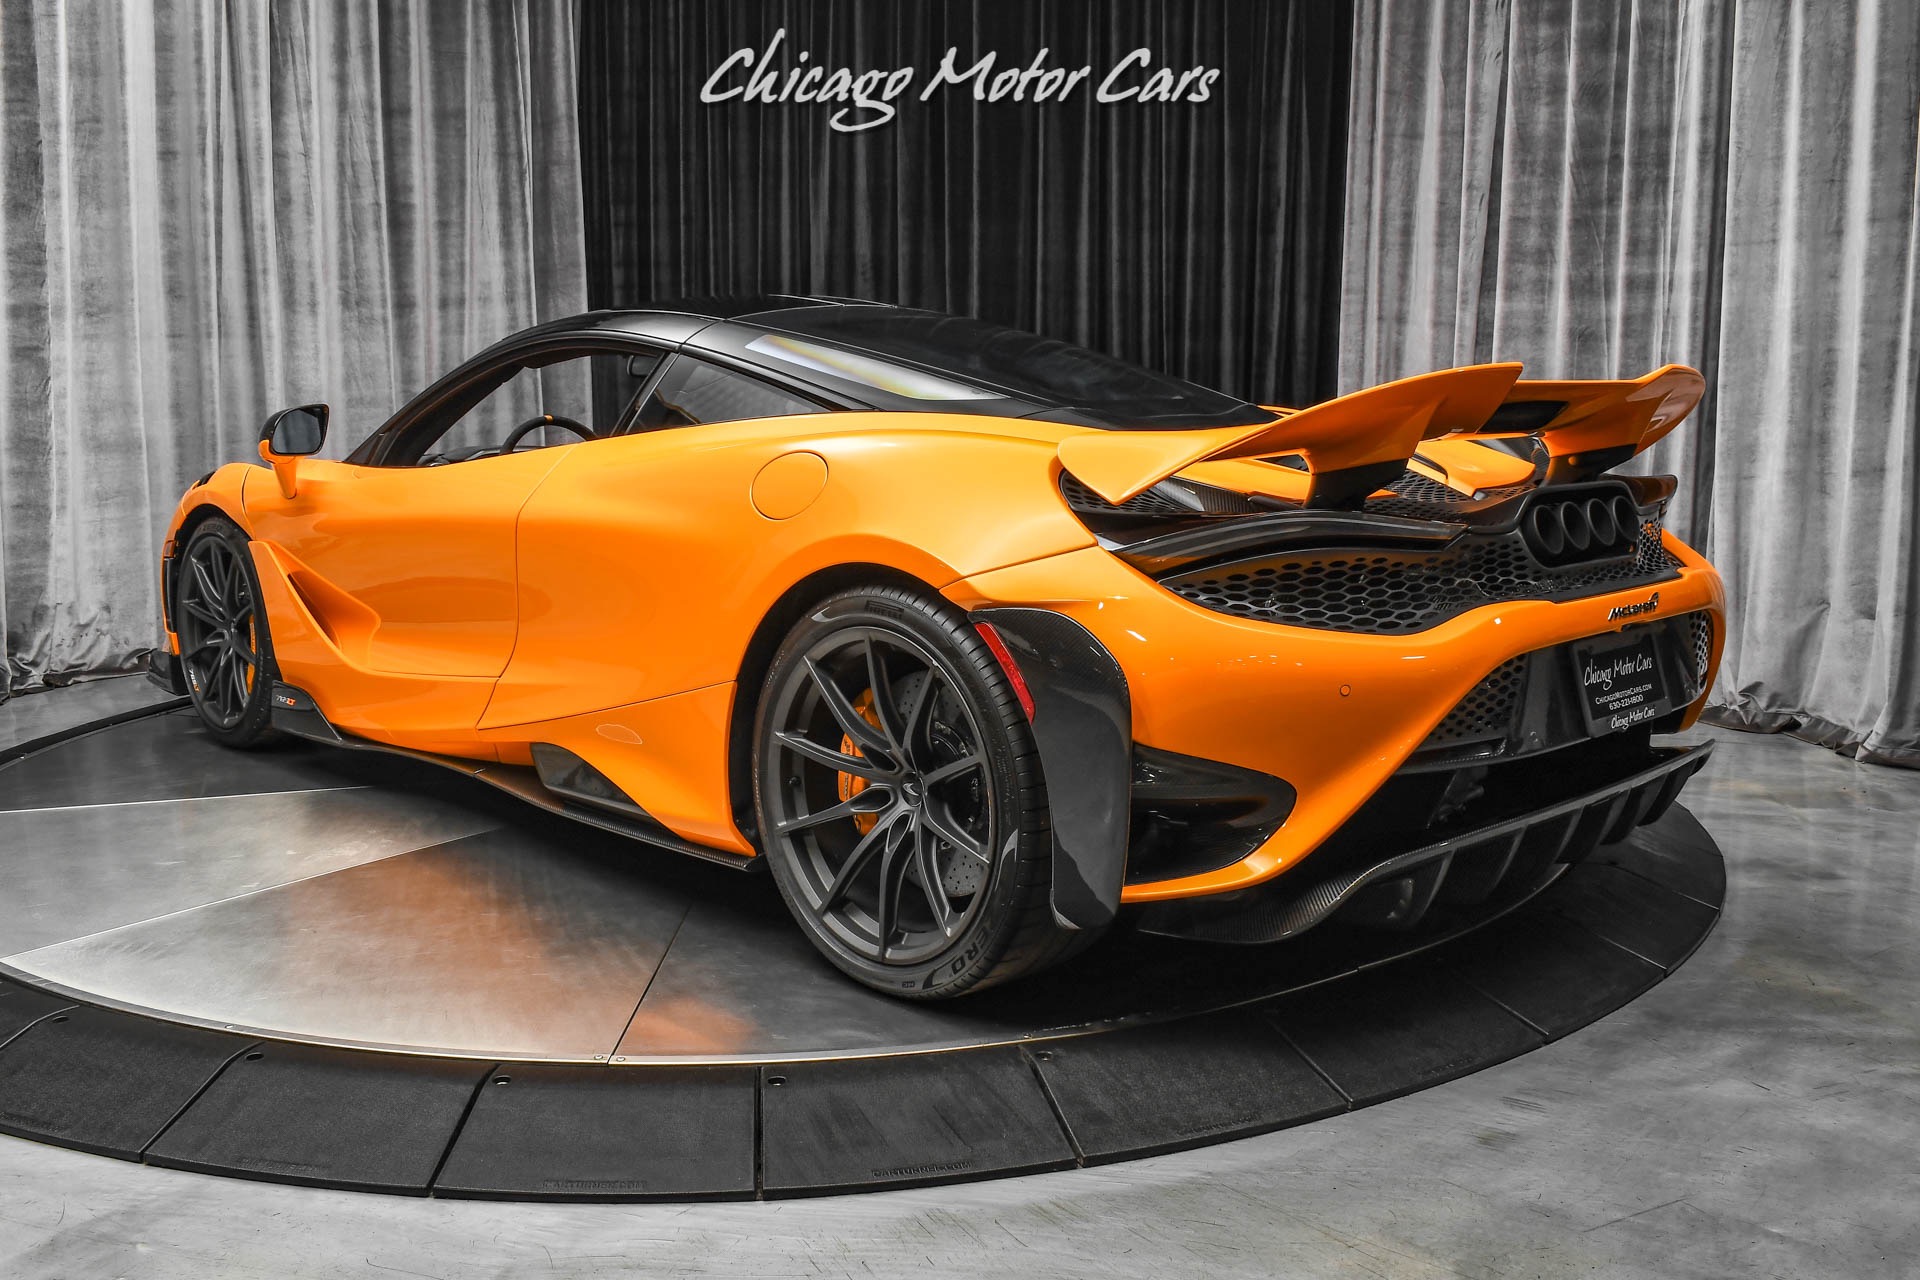 Used 2021 McLaren 765LT Coupe ONLY 169 Miles! MSO Defined Papaya Spark!  Tons of Carbon! LOADED For Sale (Special Pricing) | Chicago Motor Cars  Stock #19429